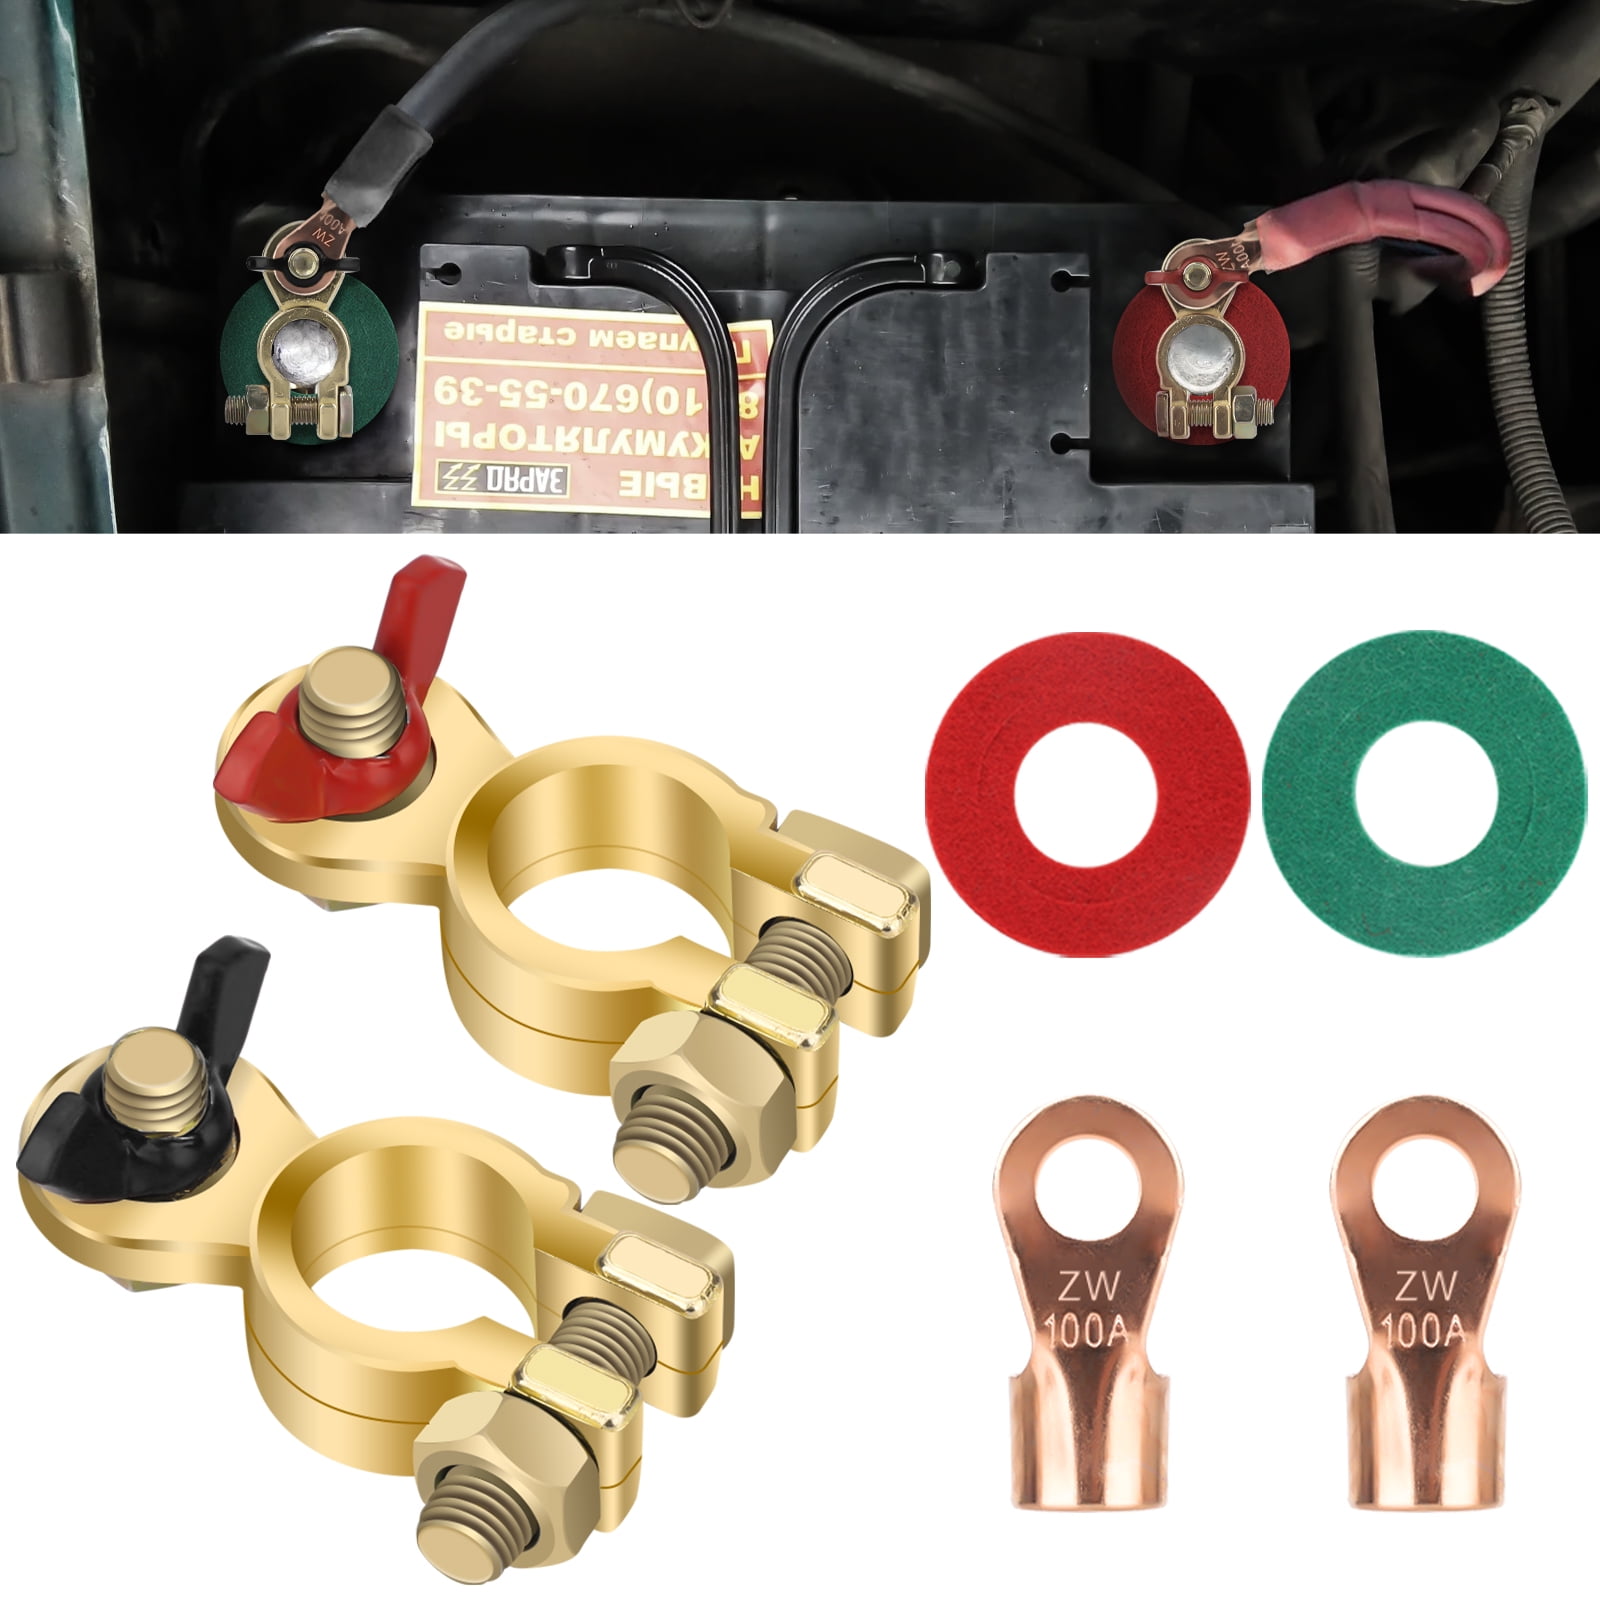 2 Pairs Terminals Connectors Quick Release for RV Motorbike Car Truck Boat Caravan Battery Terminals & 100A Open Barrel Wire Lugs 12V/24V Solid Brass Clamps Connectors with Colour Coded Wing Nuts 